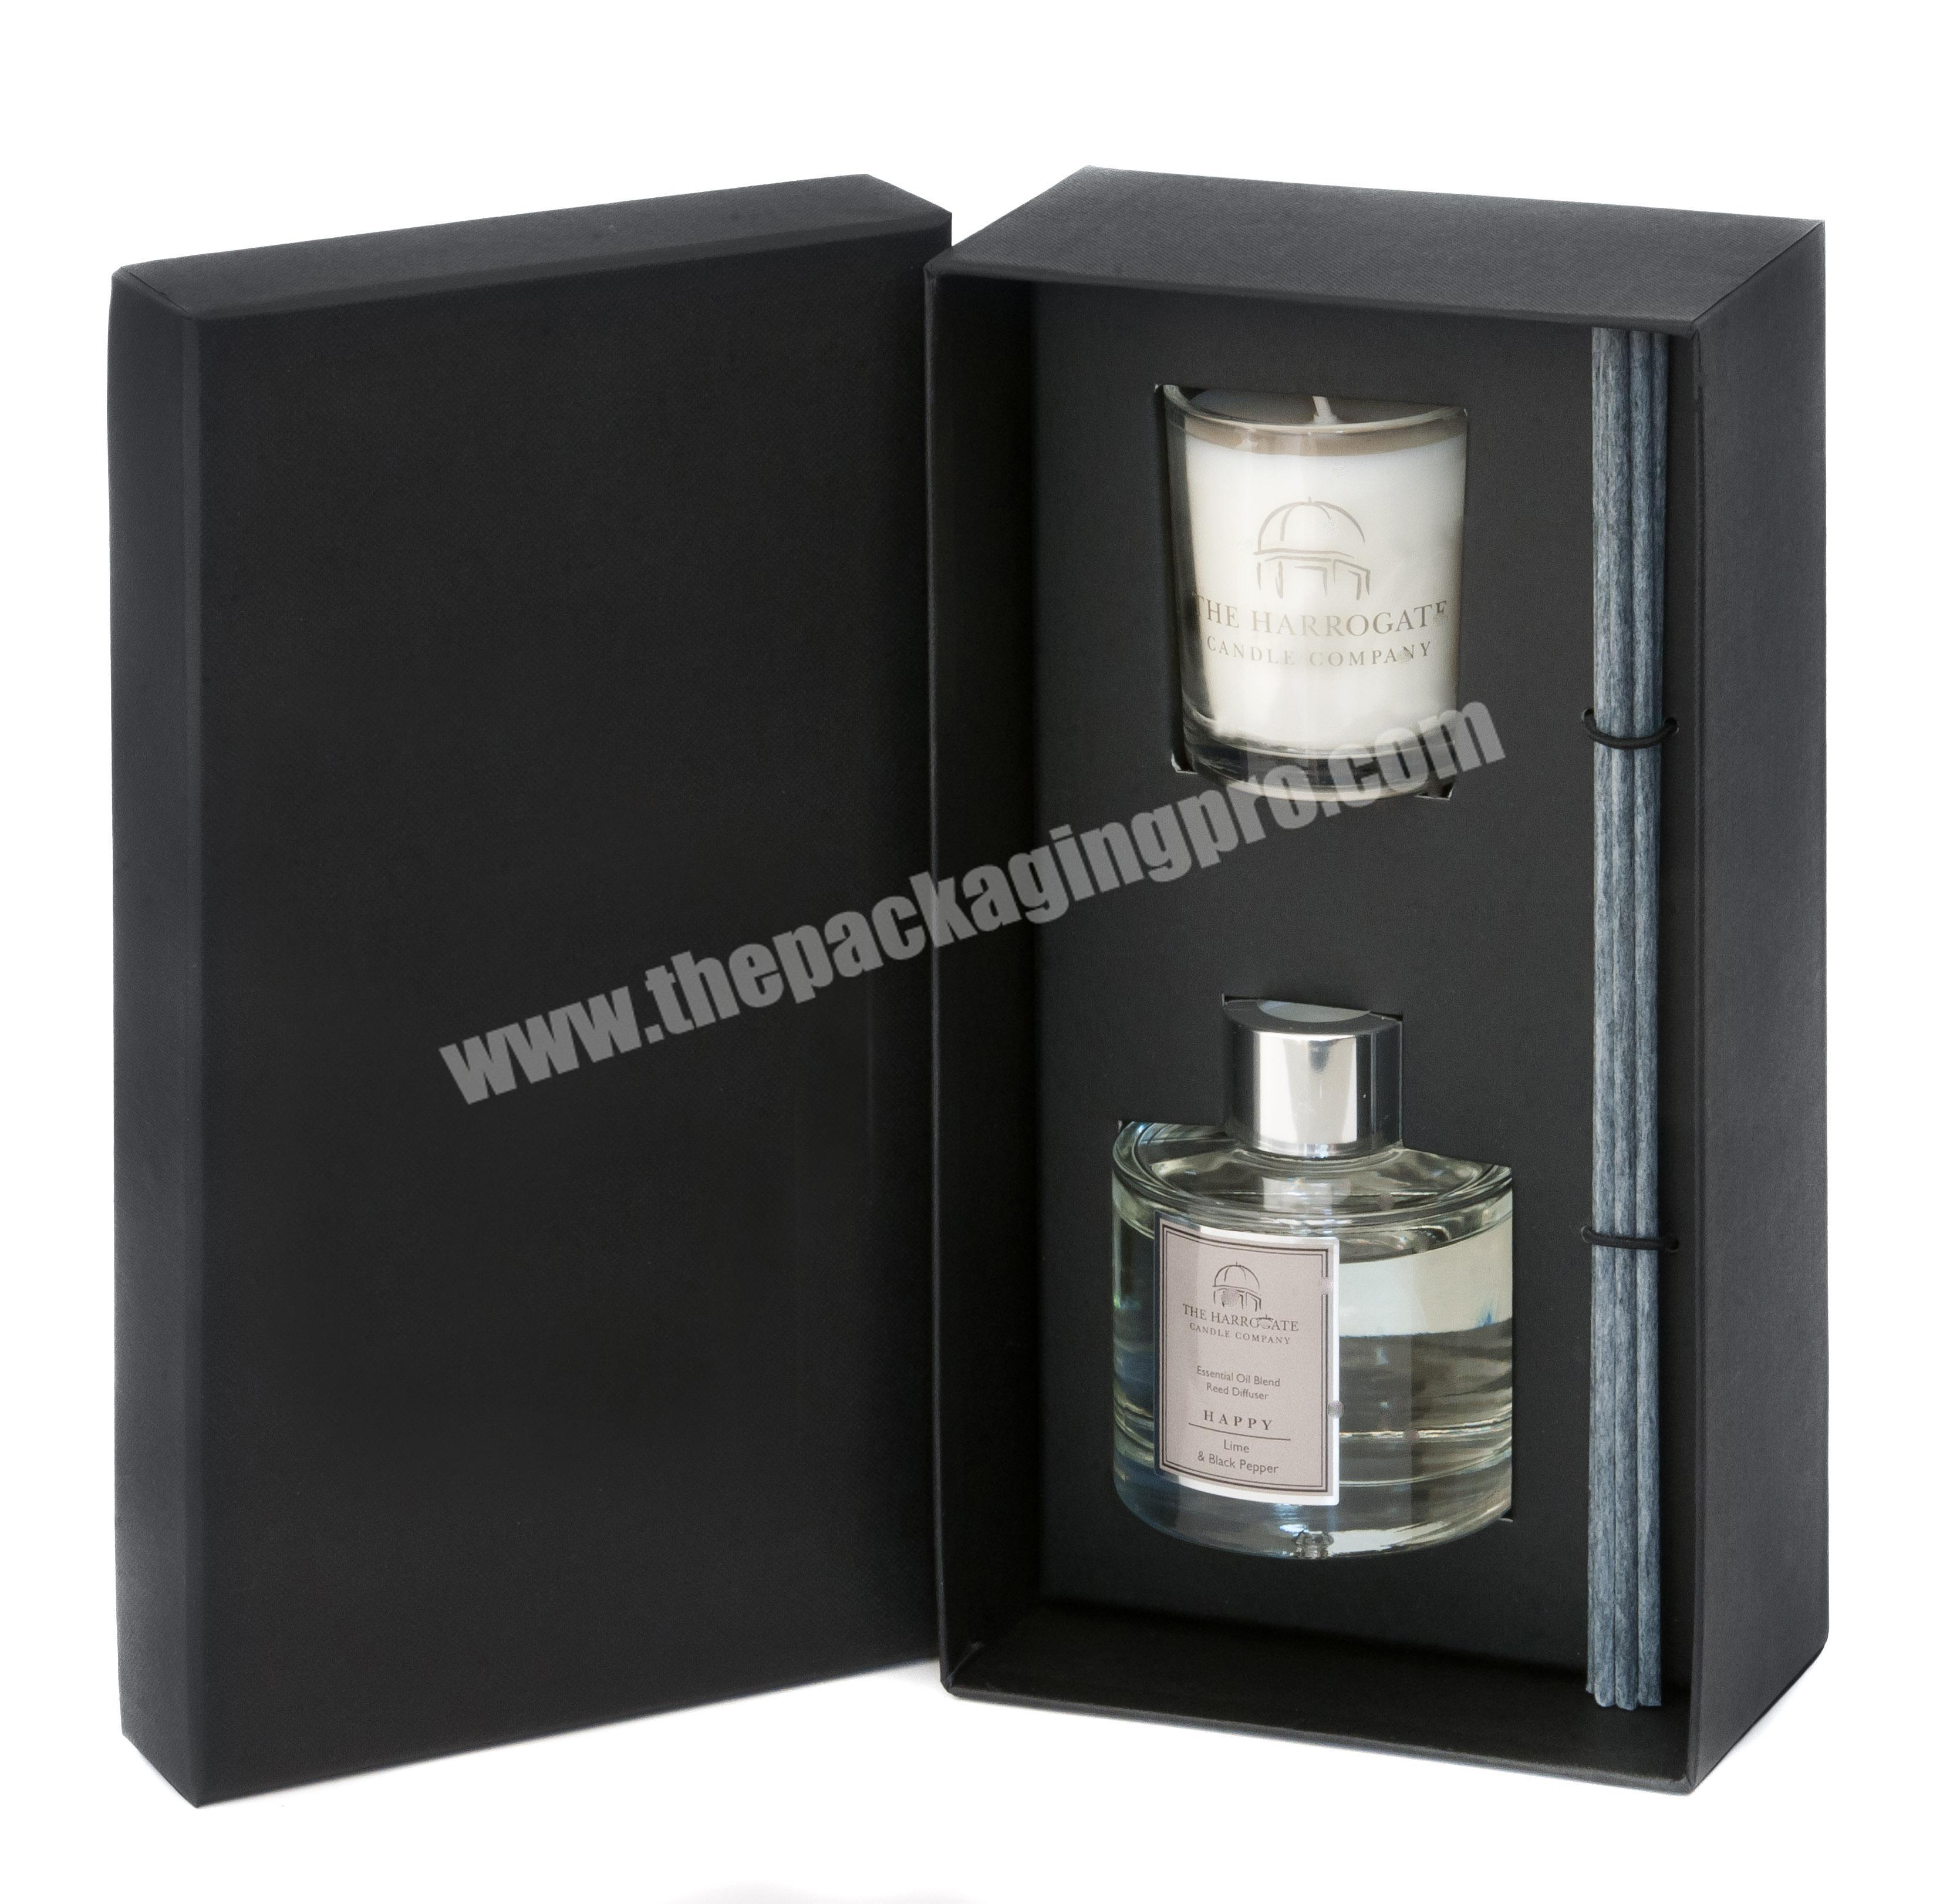 Luxury Rigid Clamshell Matte Black Candle Box Packaging, Reed Diffuser and Candle Gift Box Set